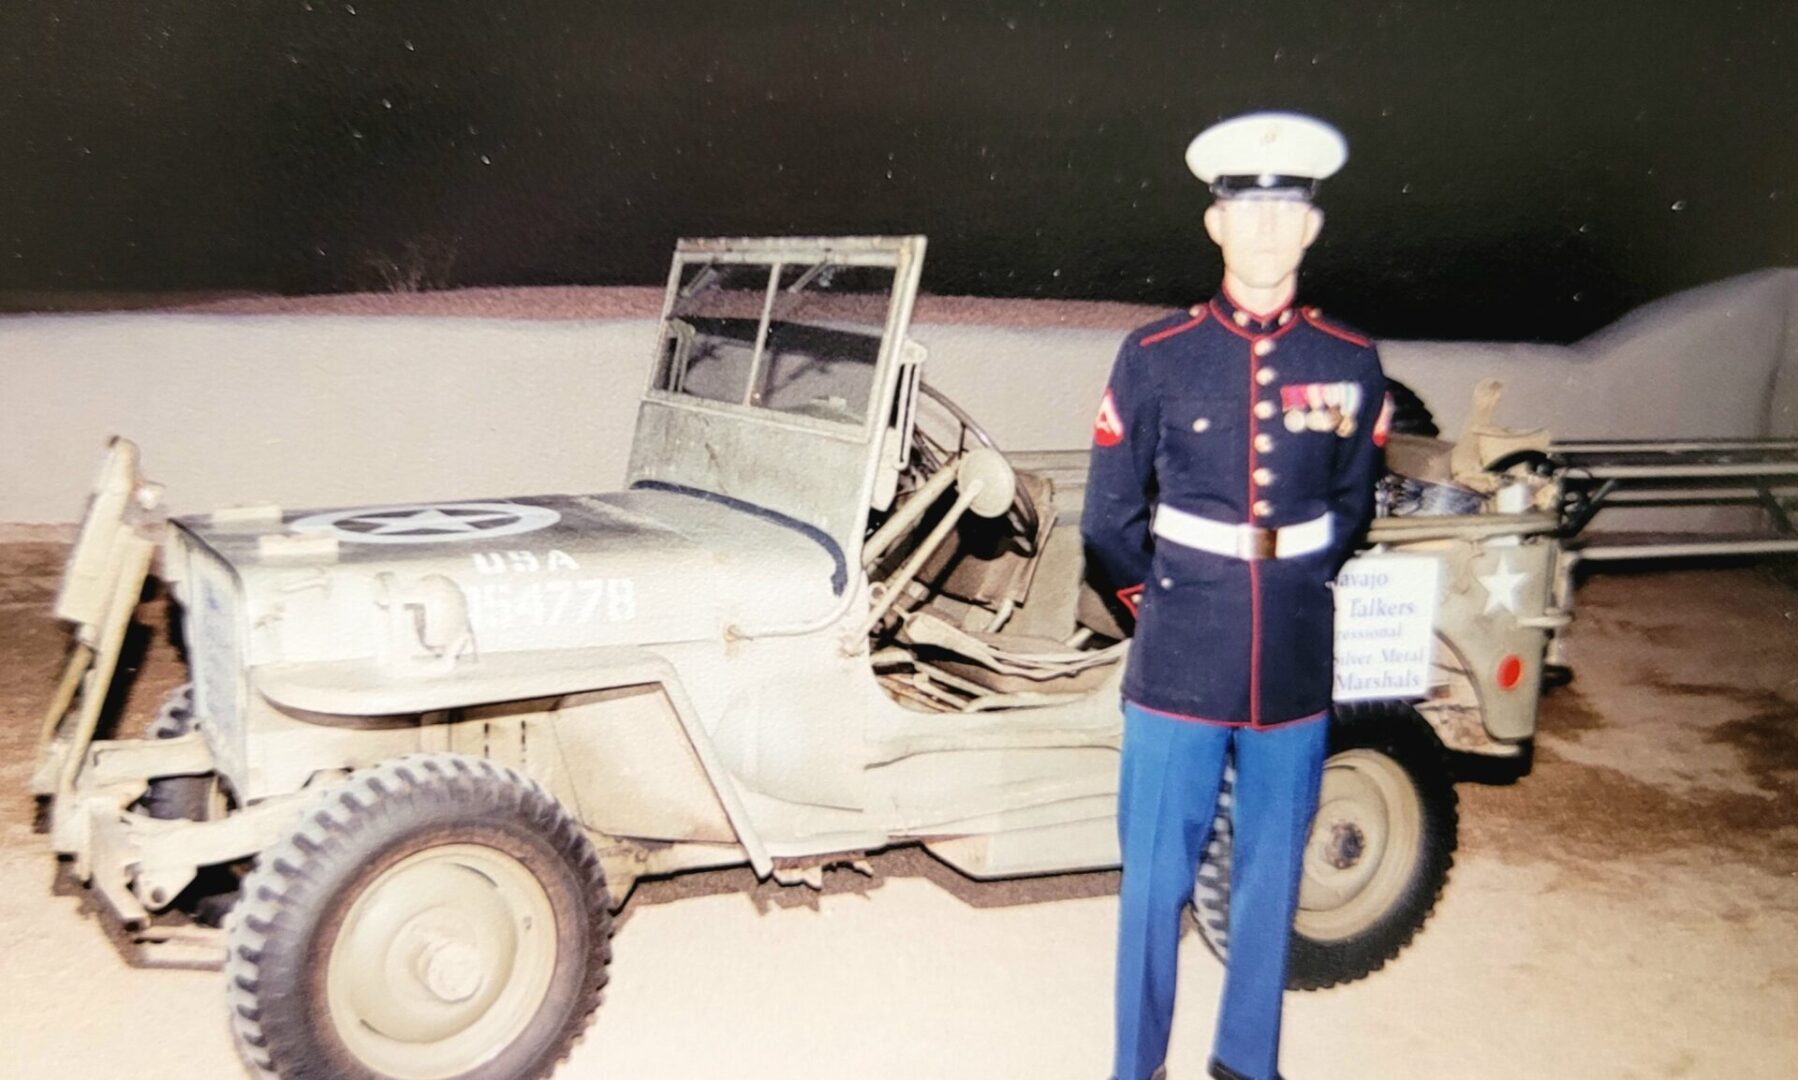 Me with a WWII era jeep after the Code Talker ceremony